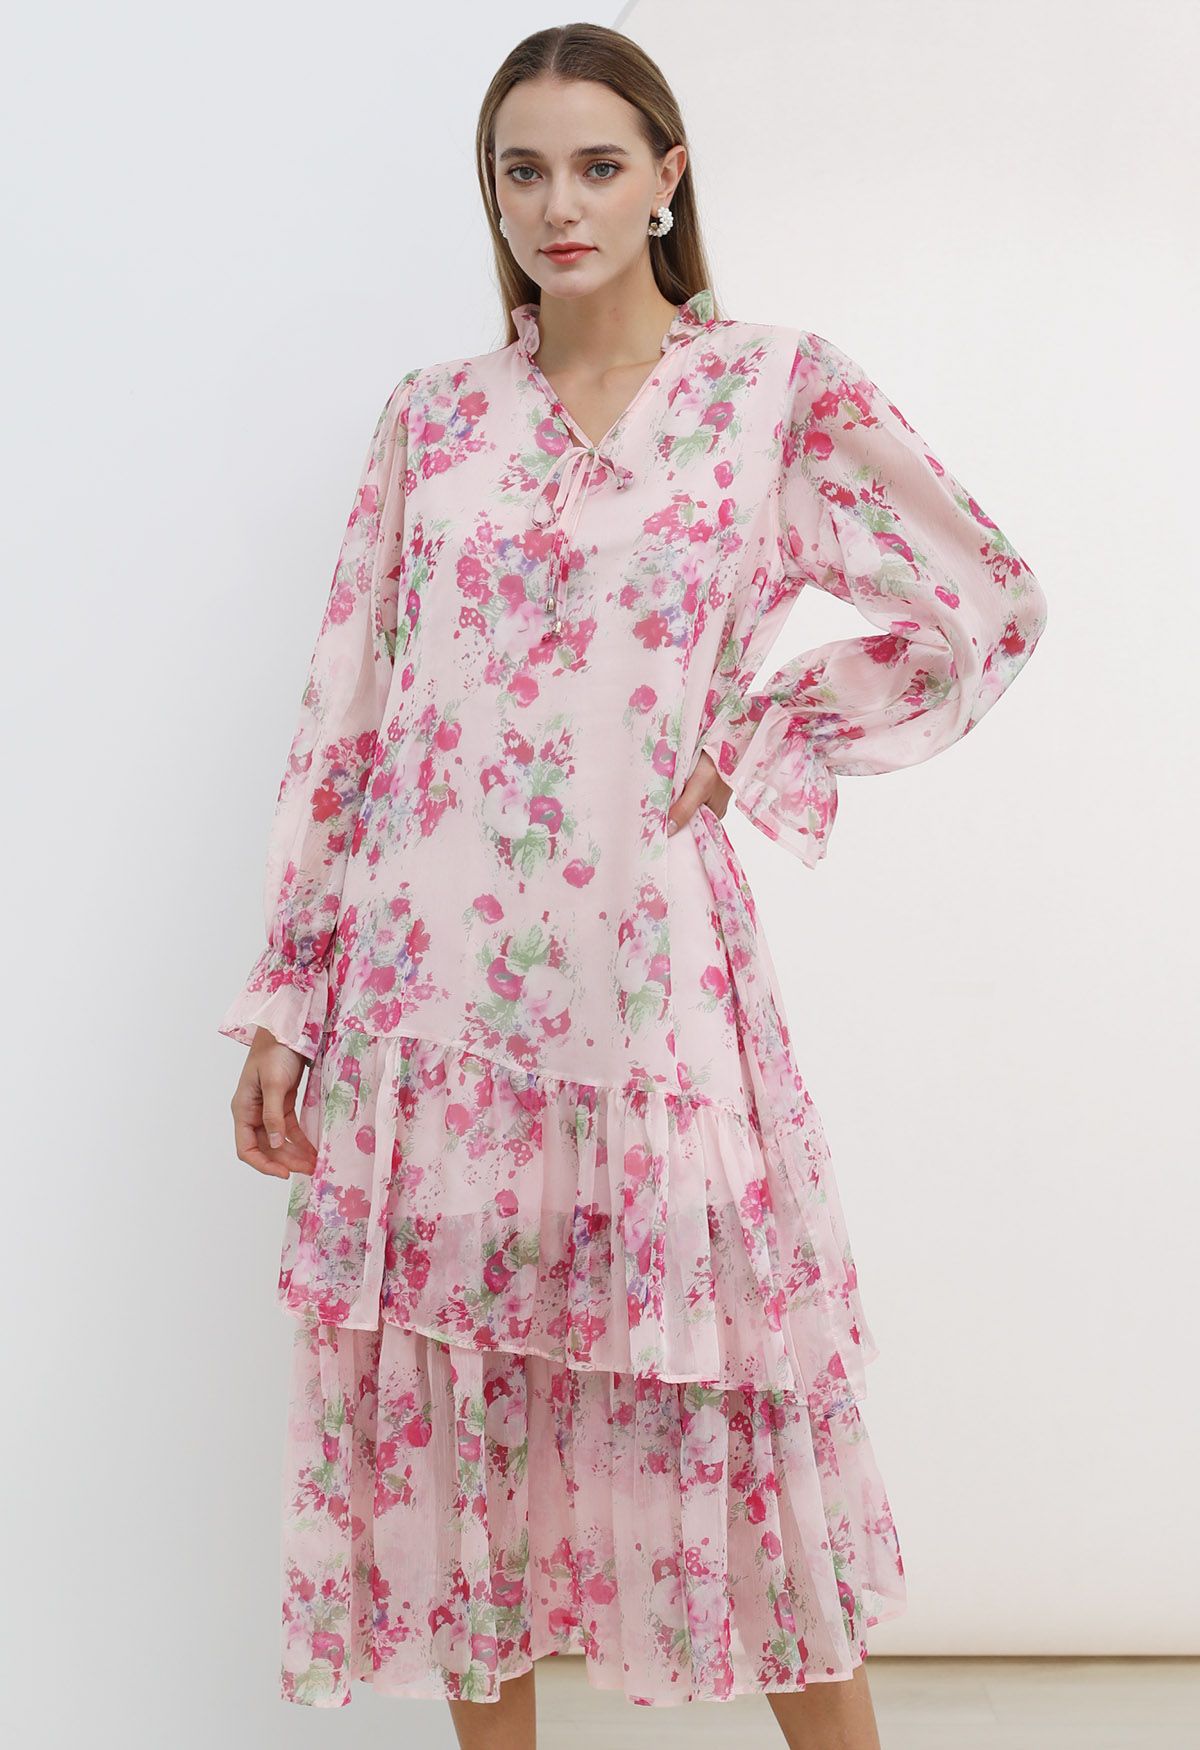 Watercolor Pink Floral Tiered Chiffon Dress - Retro, Indie and Unique ...